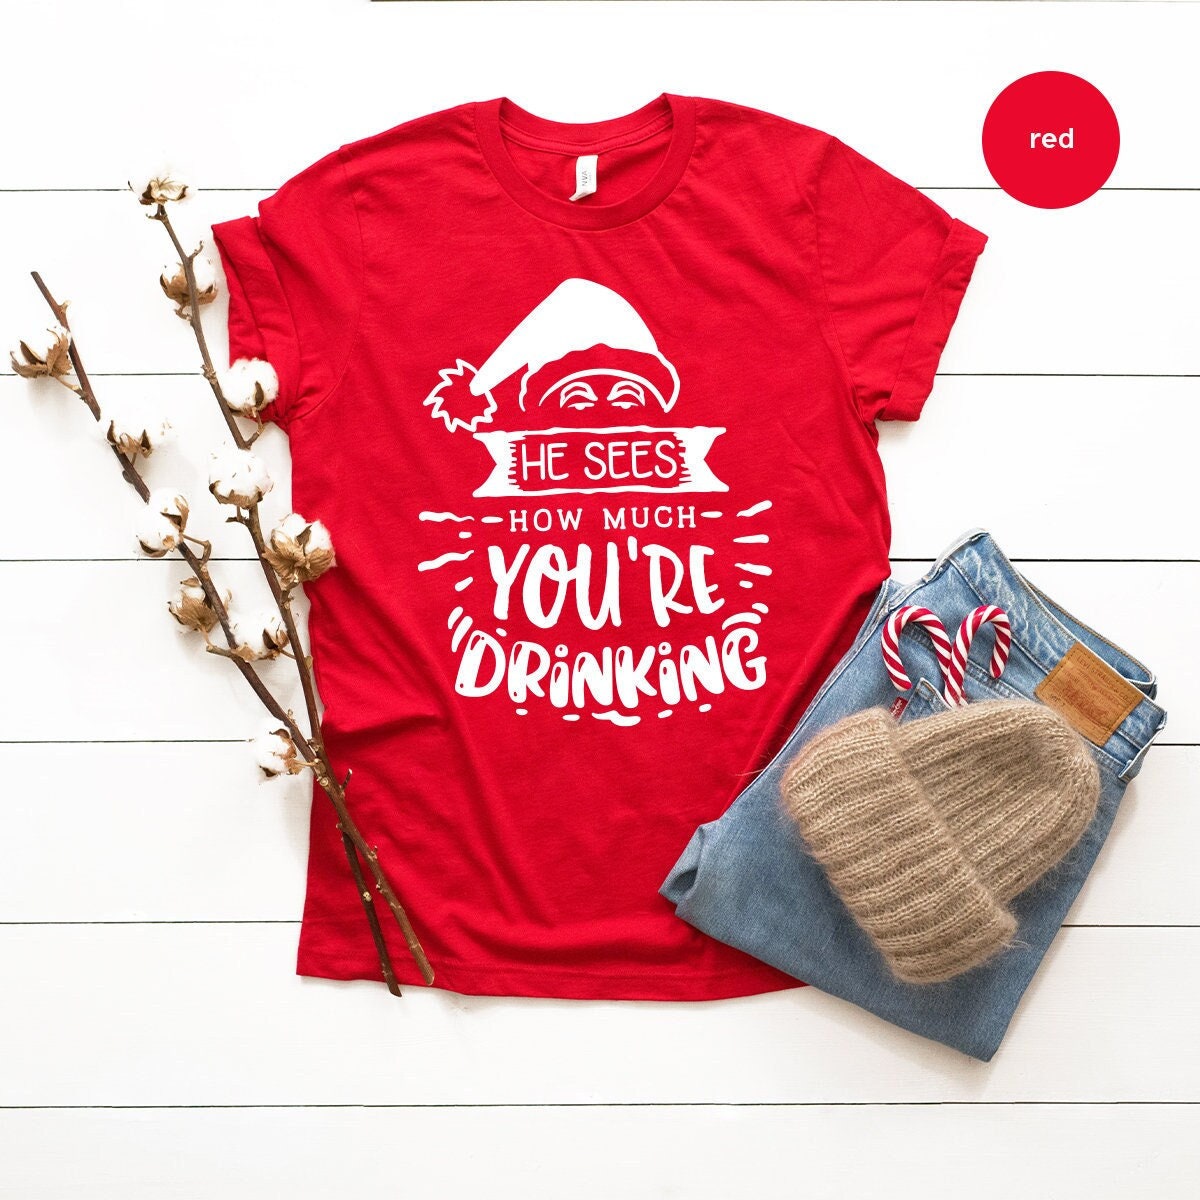 Funny Christmas Shirts, He Sees You When Youre Drinking He Knows Your Booze Intake Shirt, Drinking Shirt, Christmas 2022 Party Shirt - Fastdeliverytees.com